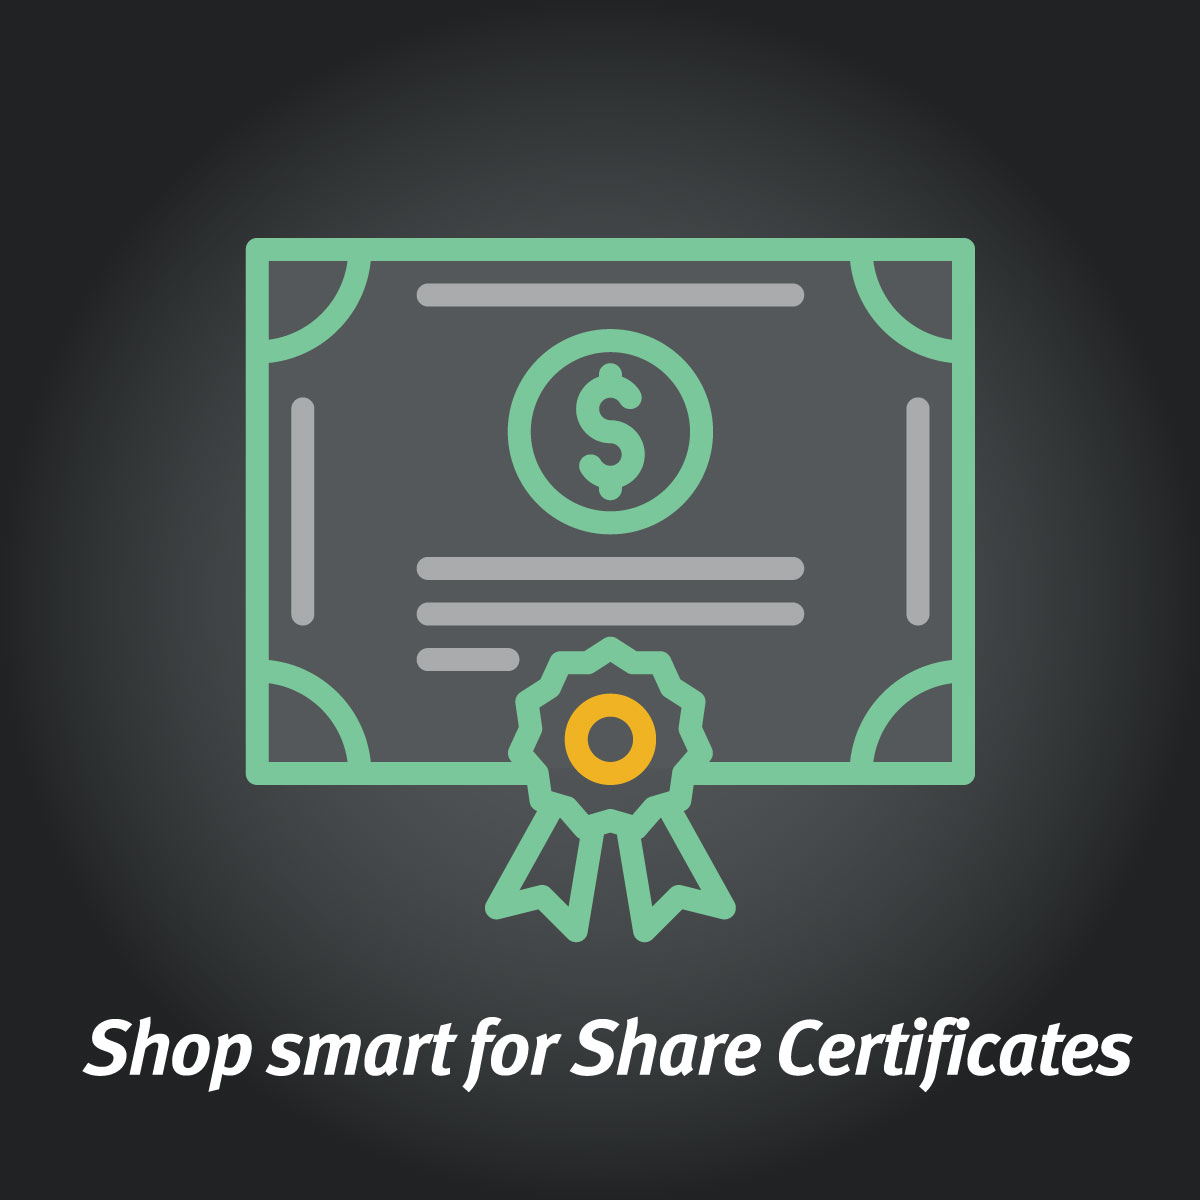 Shopping for Share Certificates